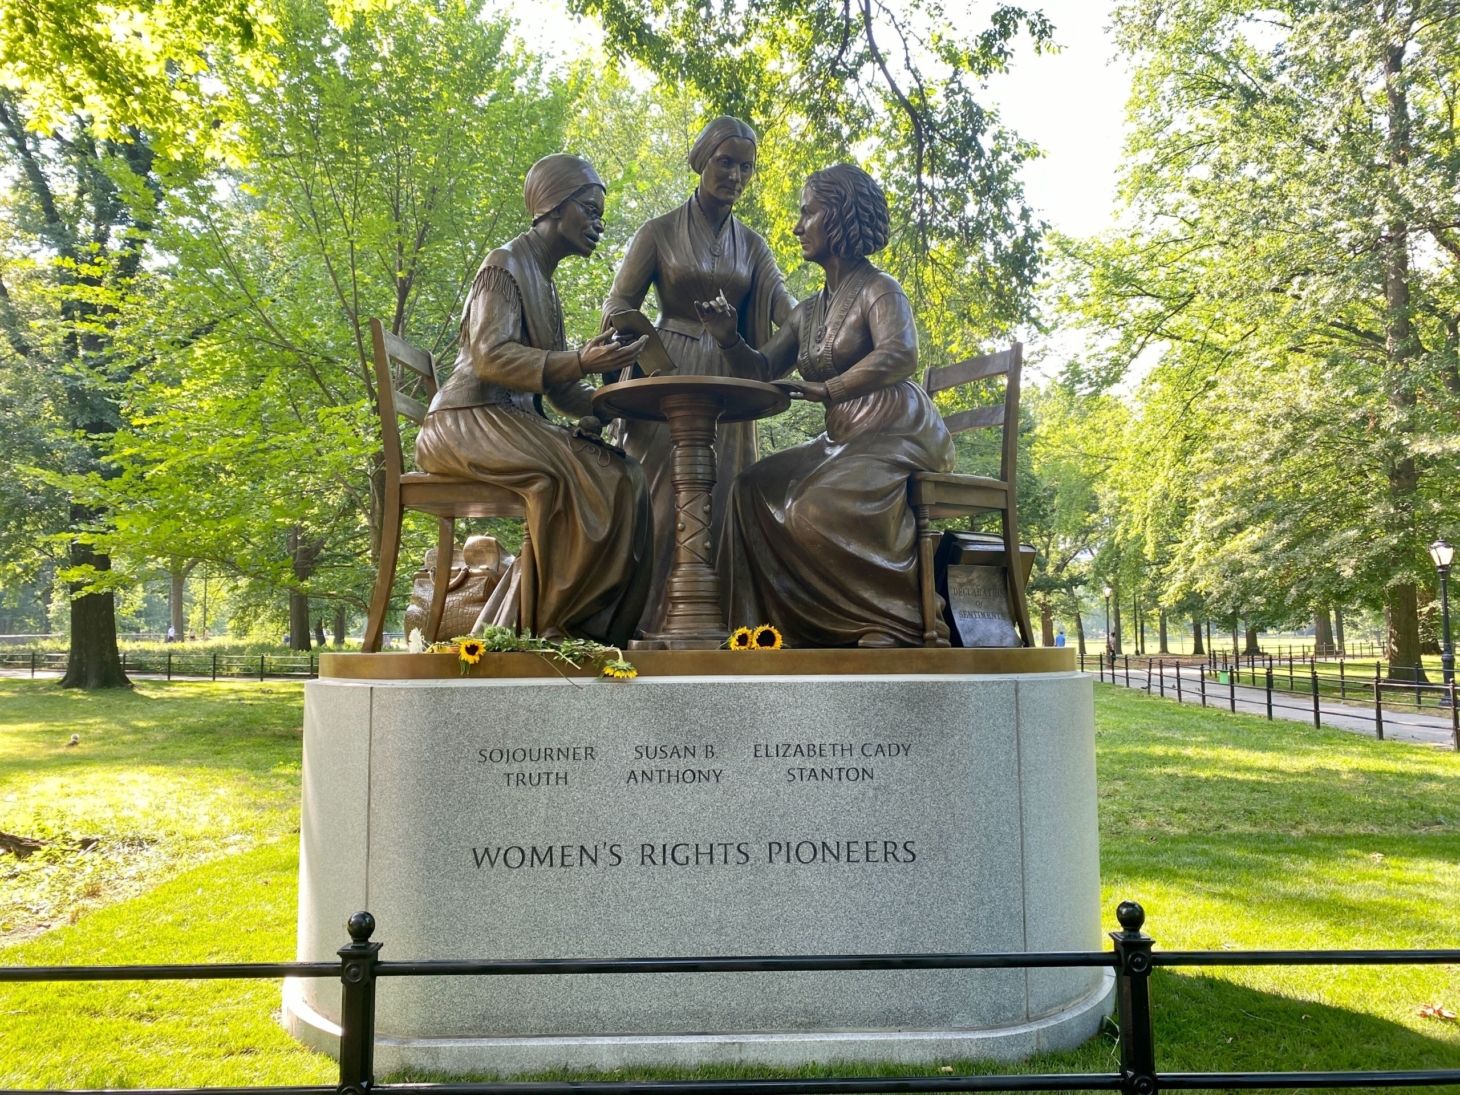 Sojourner Truth - A slave, a woman, a speaker